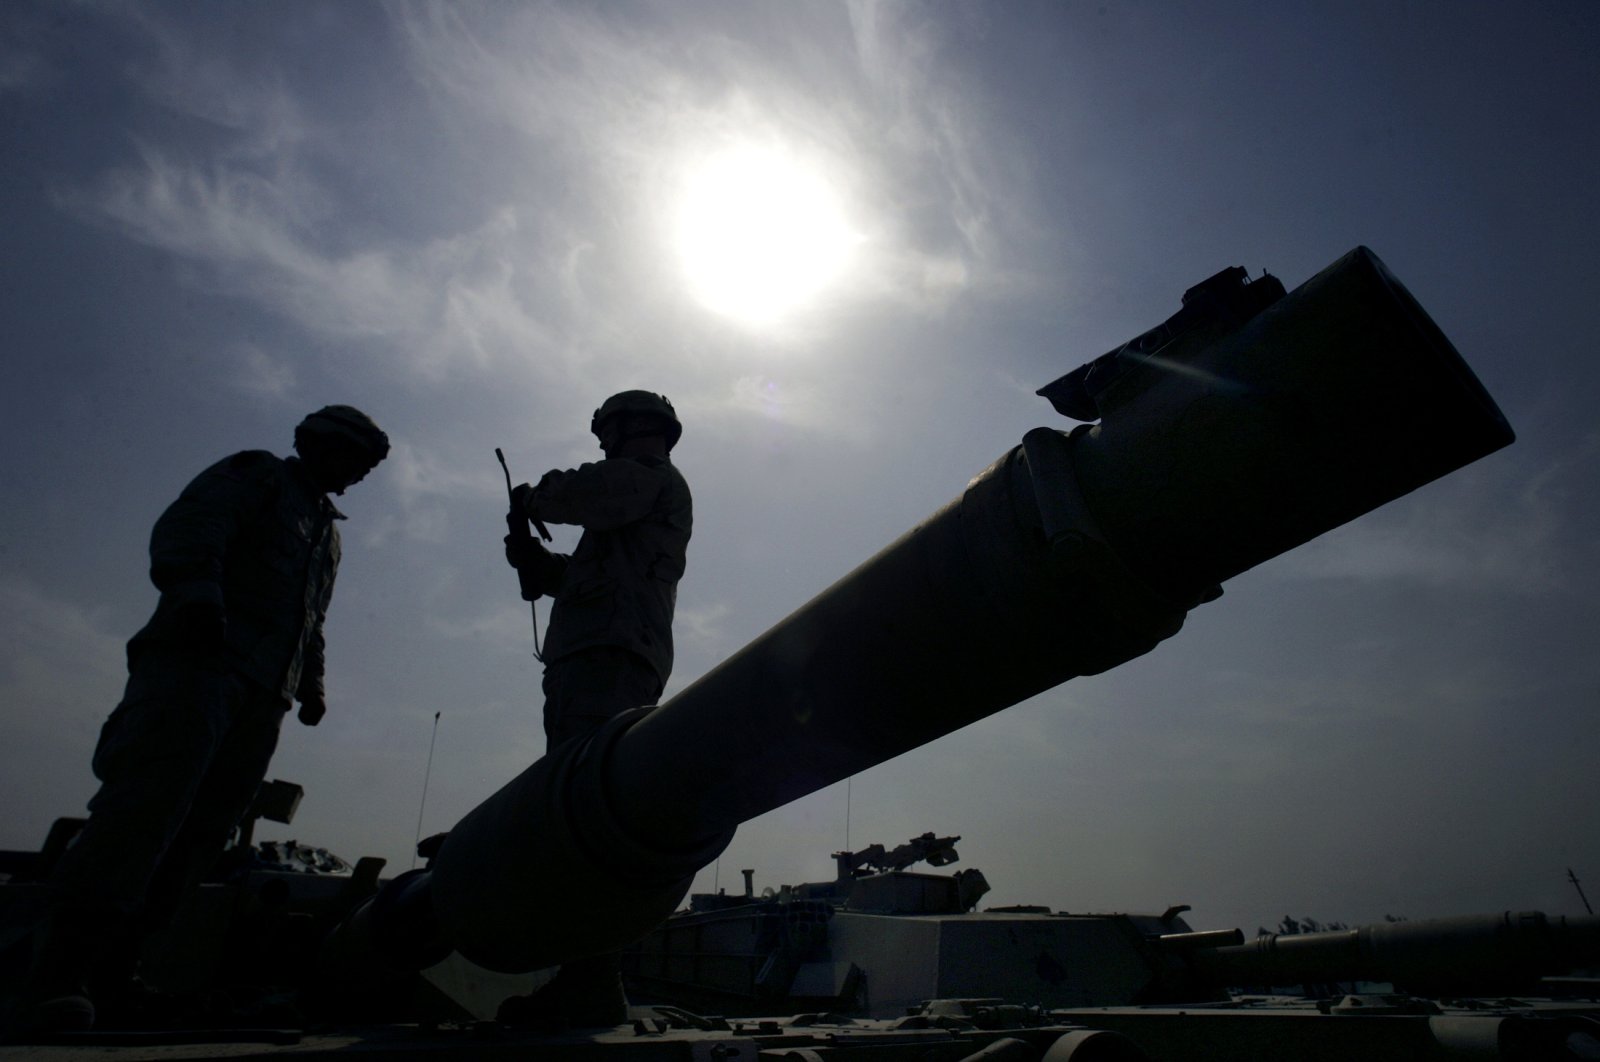 U.S. Army Second Battalion 34th Armor Regiment specialists David Randolph (R) and Martin Trump prepare their M1-A1 tank at a base Gabe in Baquba, Iraq Oct. 11, 2005. (Reuters File Photo)